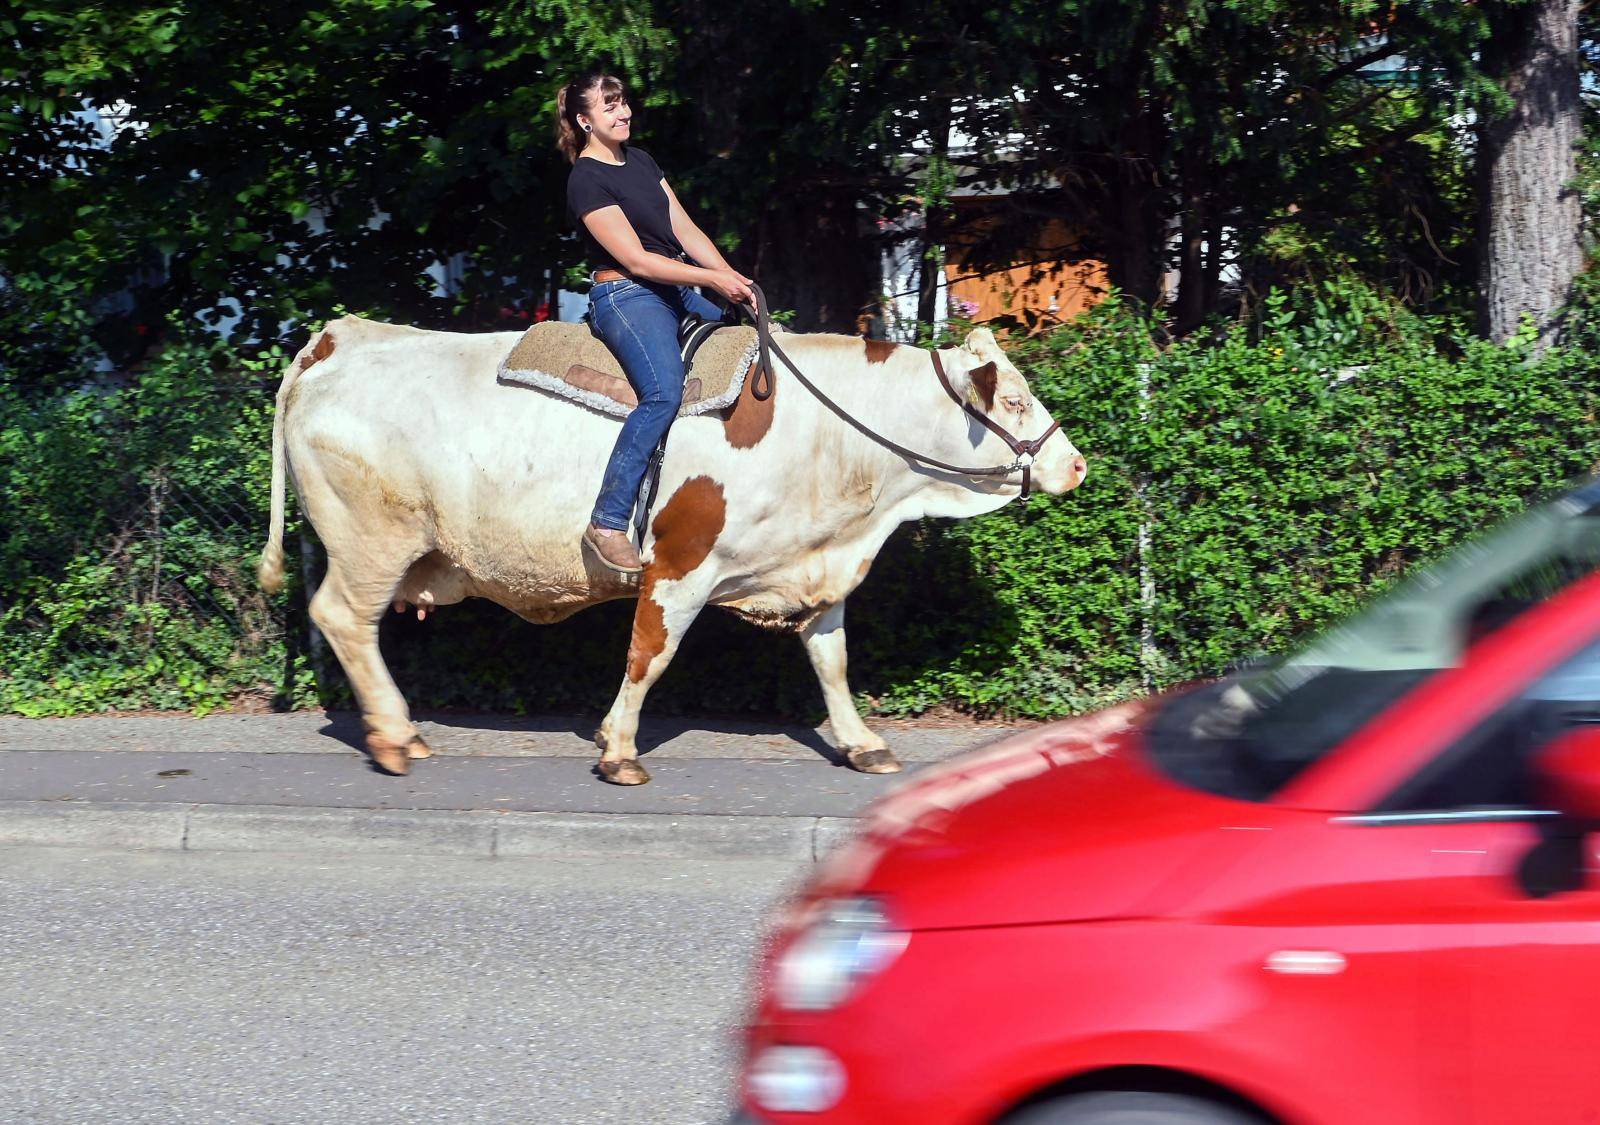 Mounted cow